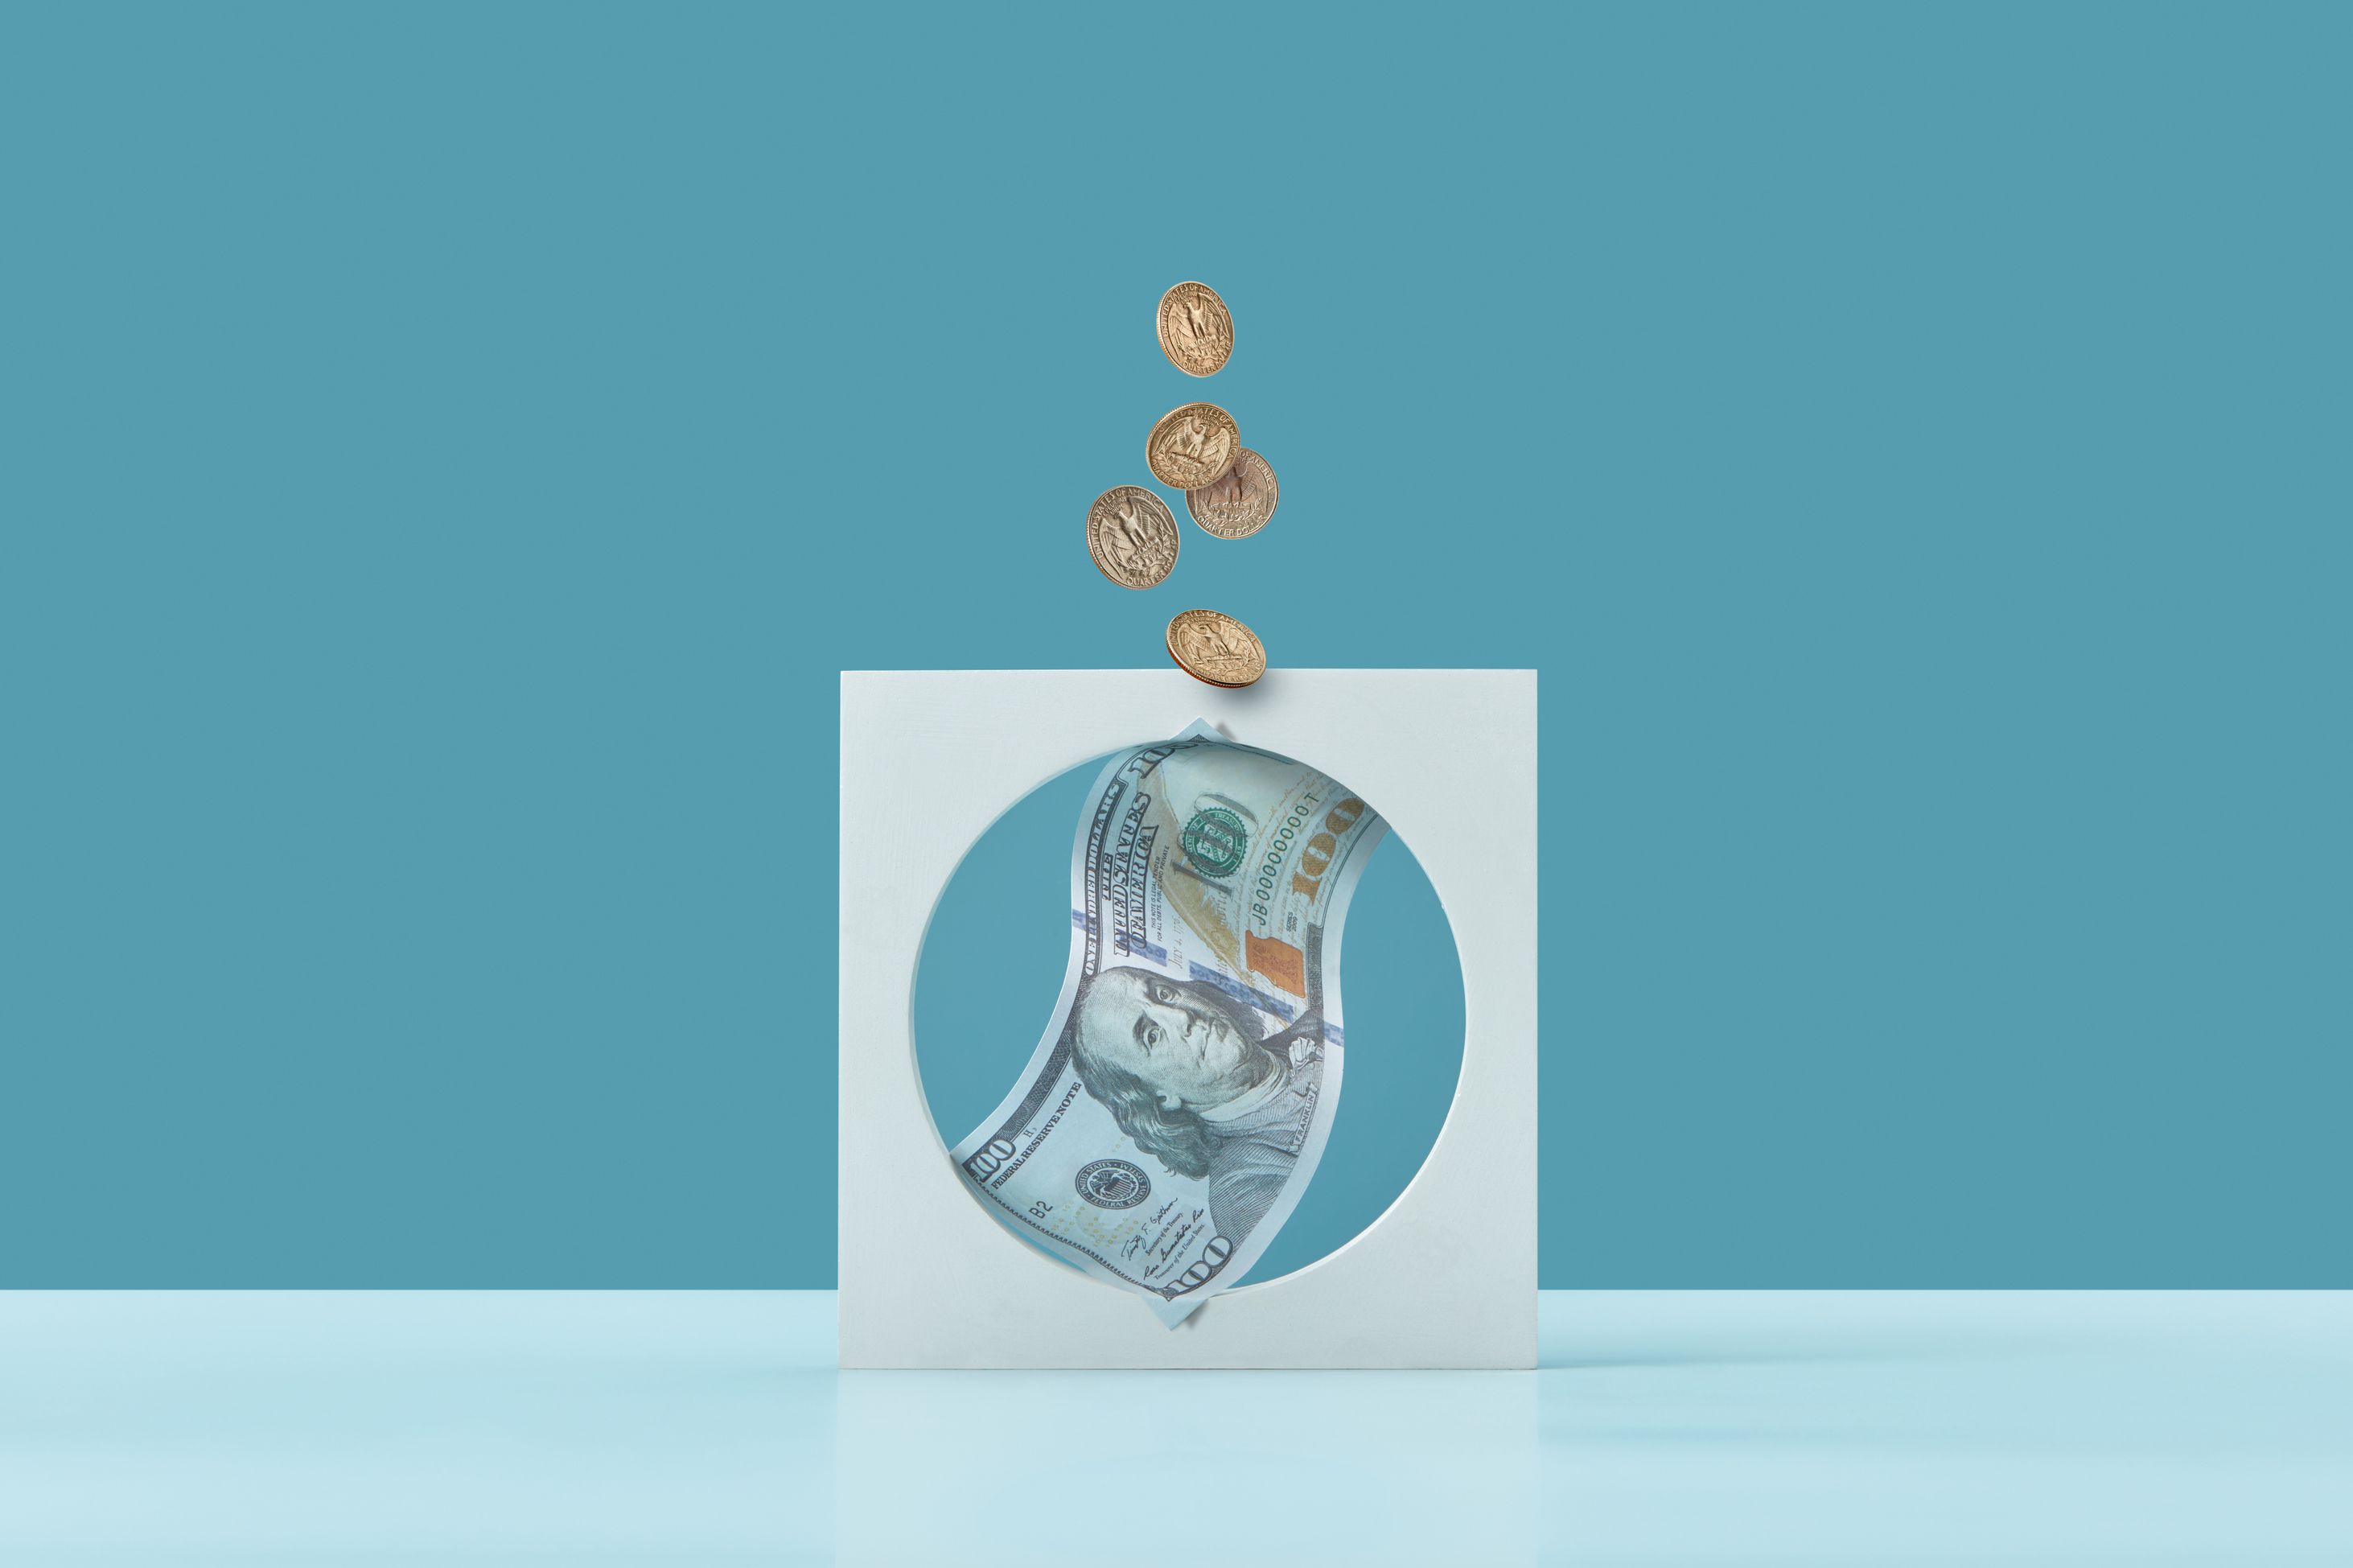 An image of a 100 dollar bill in a circle with coins falling down on it on a sky blue background. 